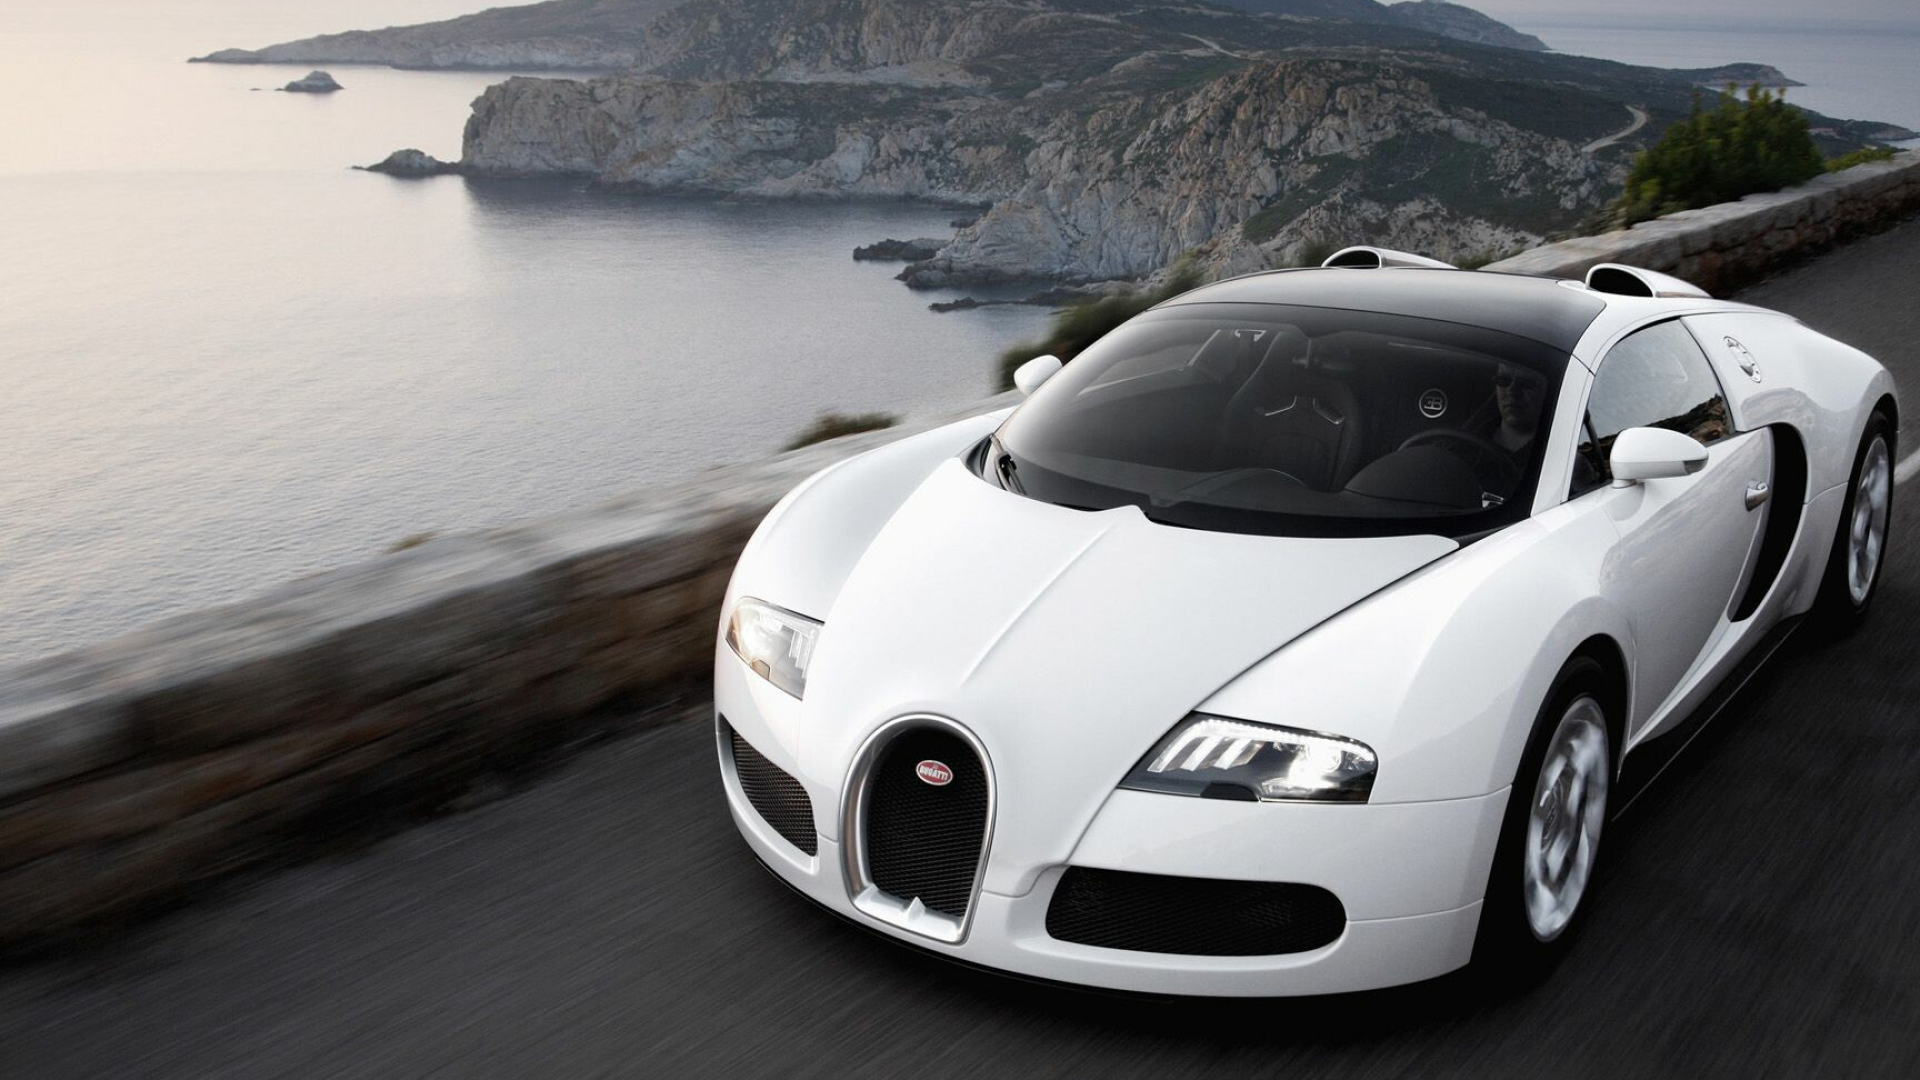 Bugatti: Veyron EB 16.4, named after the racing driver Pierre Veyron. 1920x1080 Full HD Wallpaper.